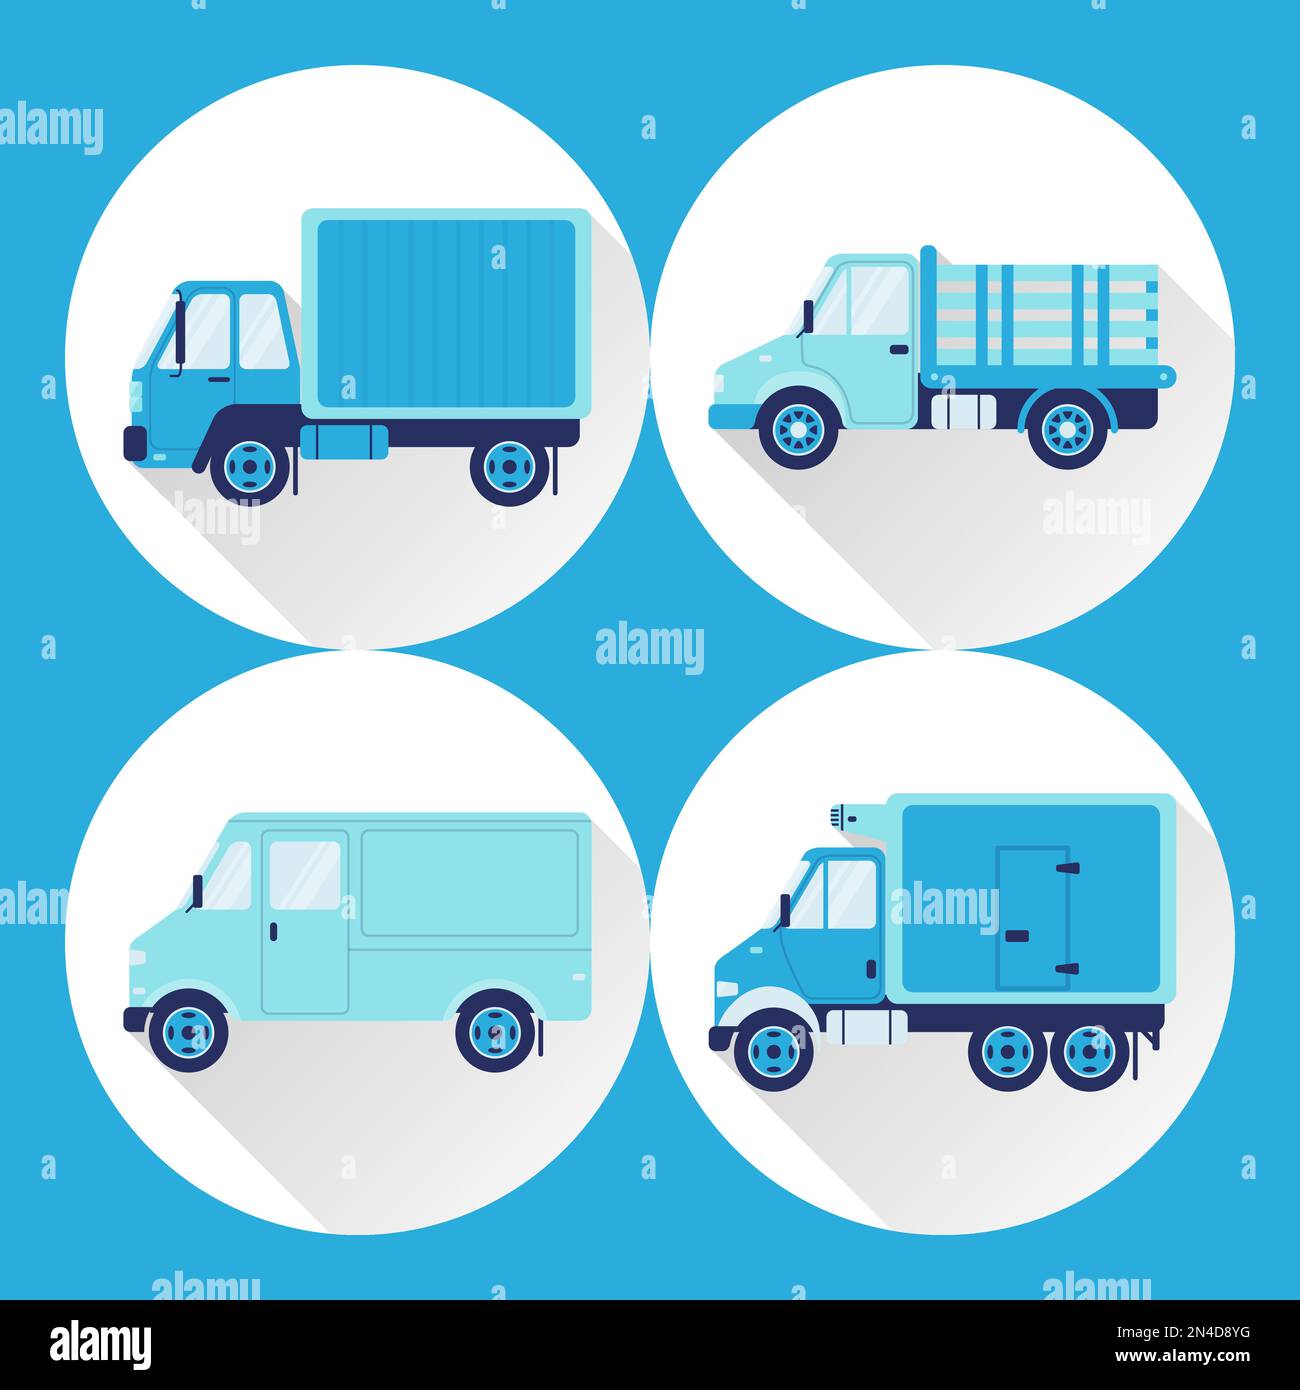 Set of truck icons in flat style with long shadow. Collection of cargo vehicle symbols on round layer. Stock Vector